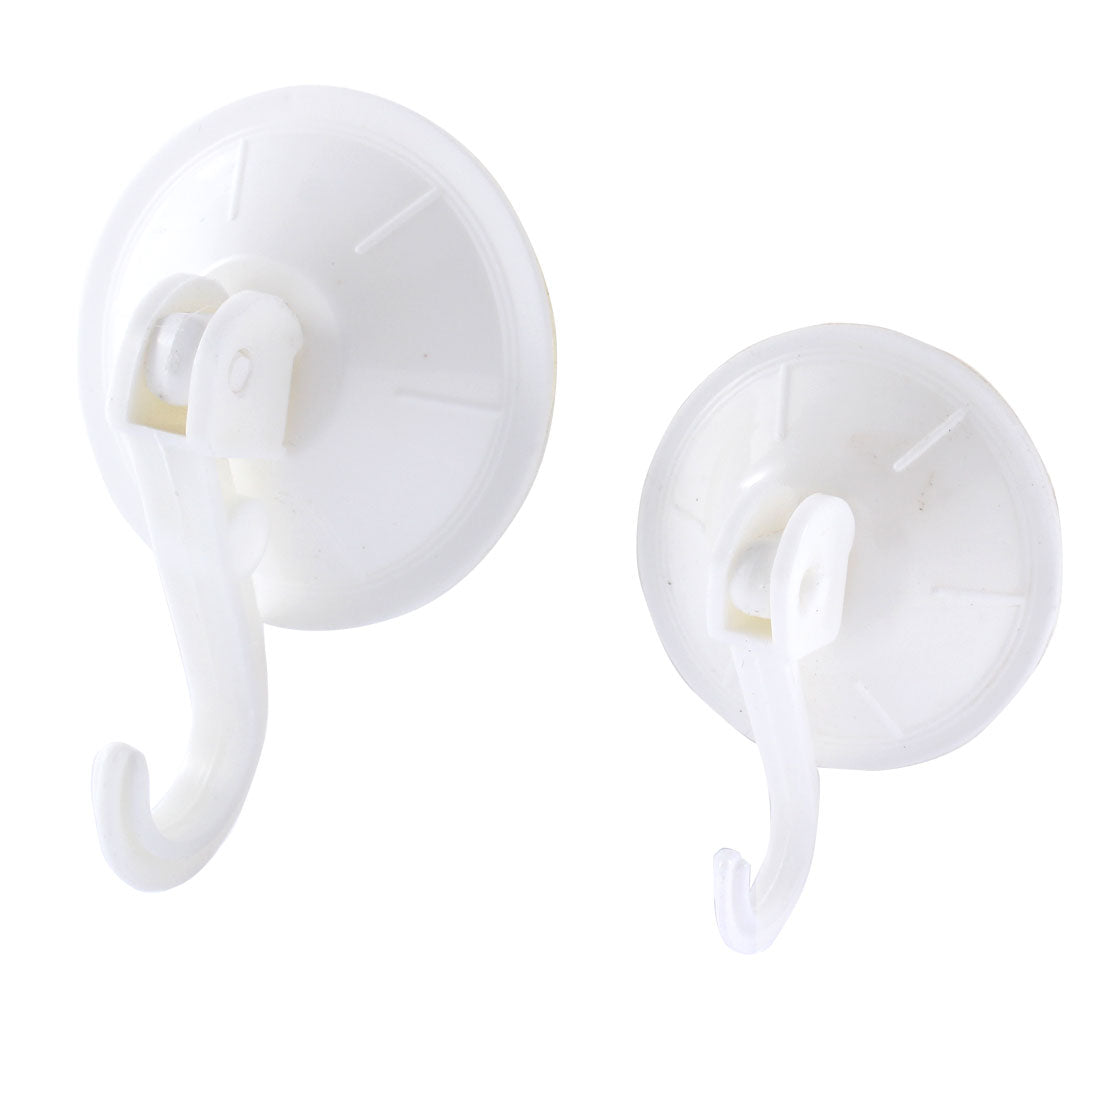 uxcell Uxcell Kitchen Bathroom Shower Suction Cup Door Wall Hook Towel Pan Hanger White 2pcs